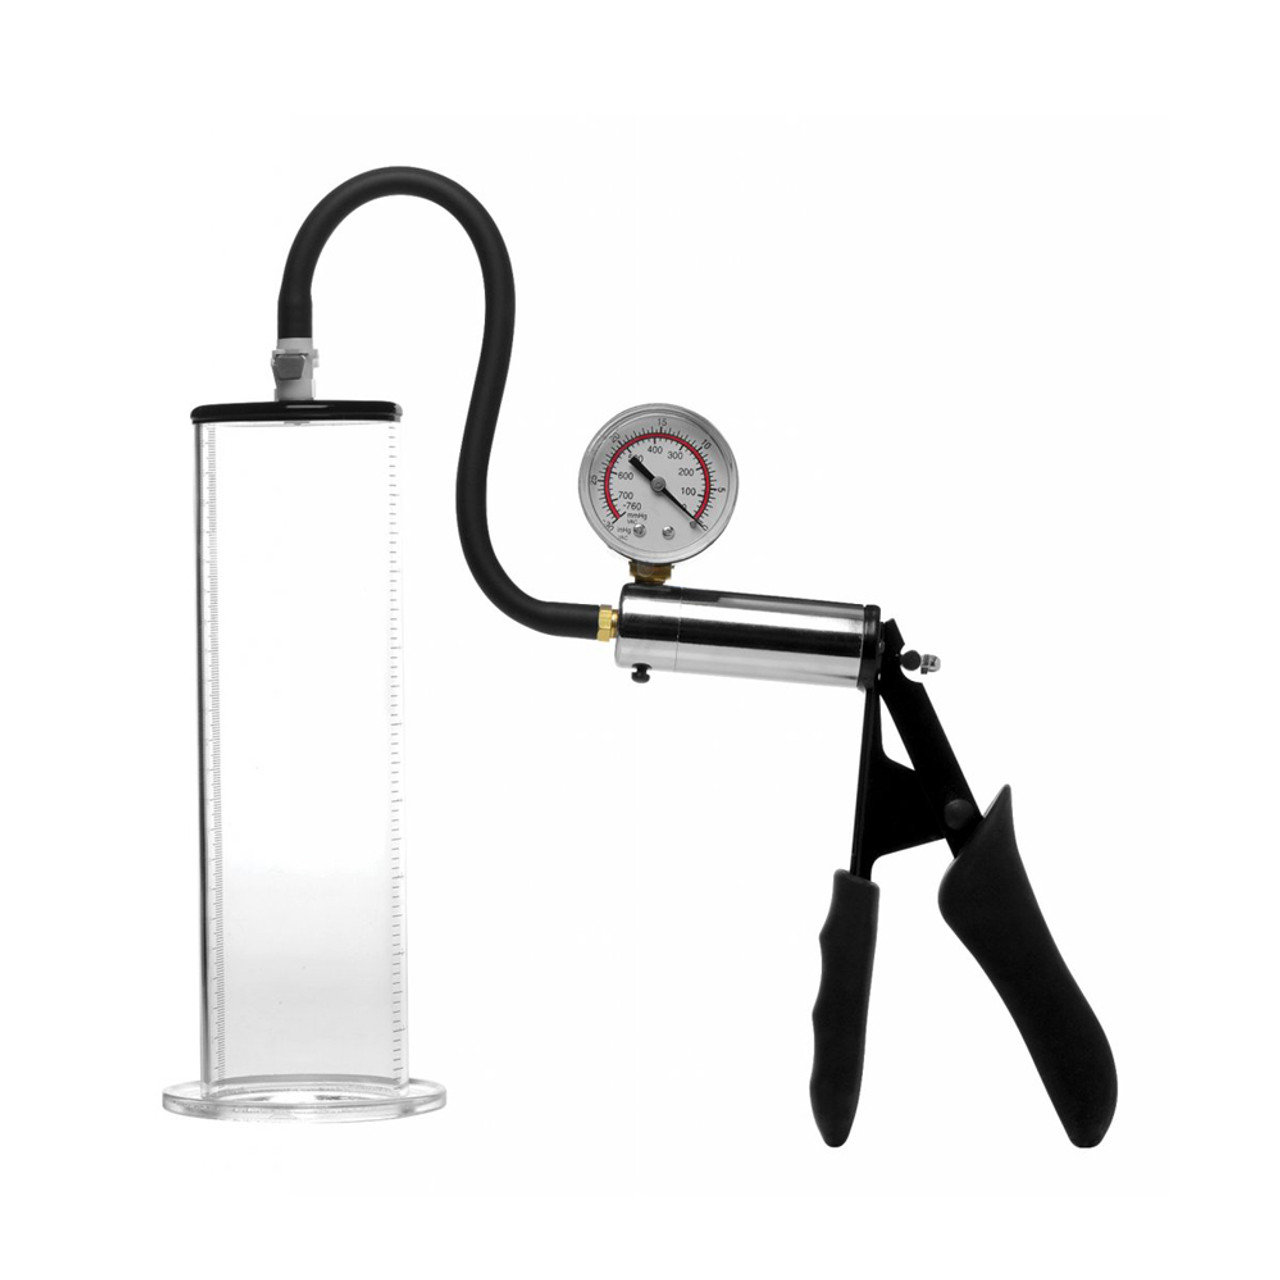 XR Brands Size Matters Penis Pump Kit with 2.5 inch Cylinder & Hand Pump  with Gauge